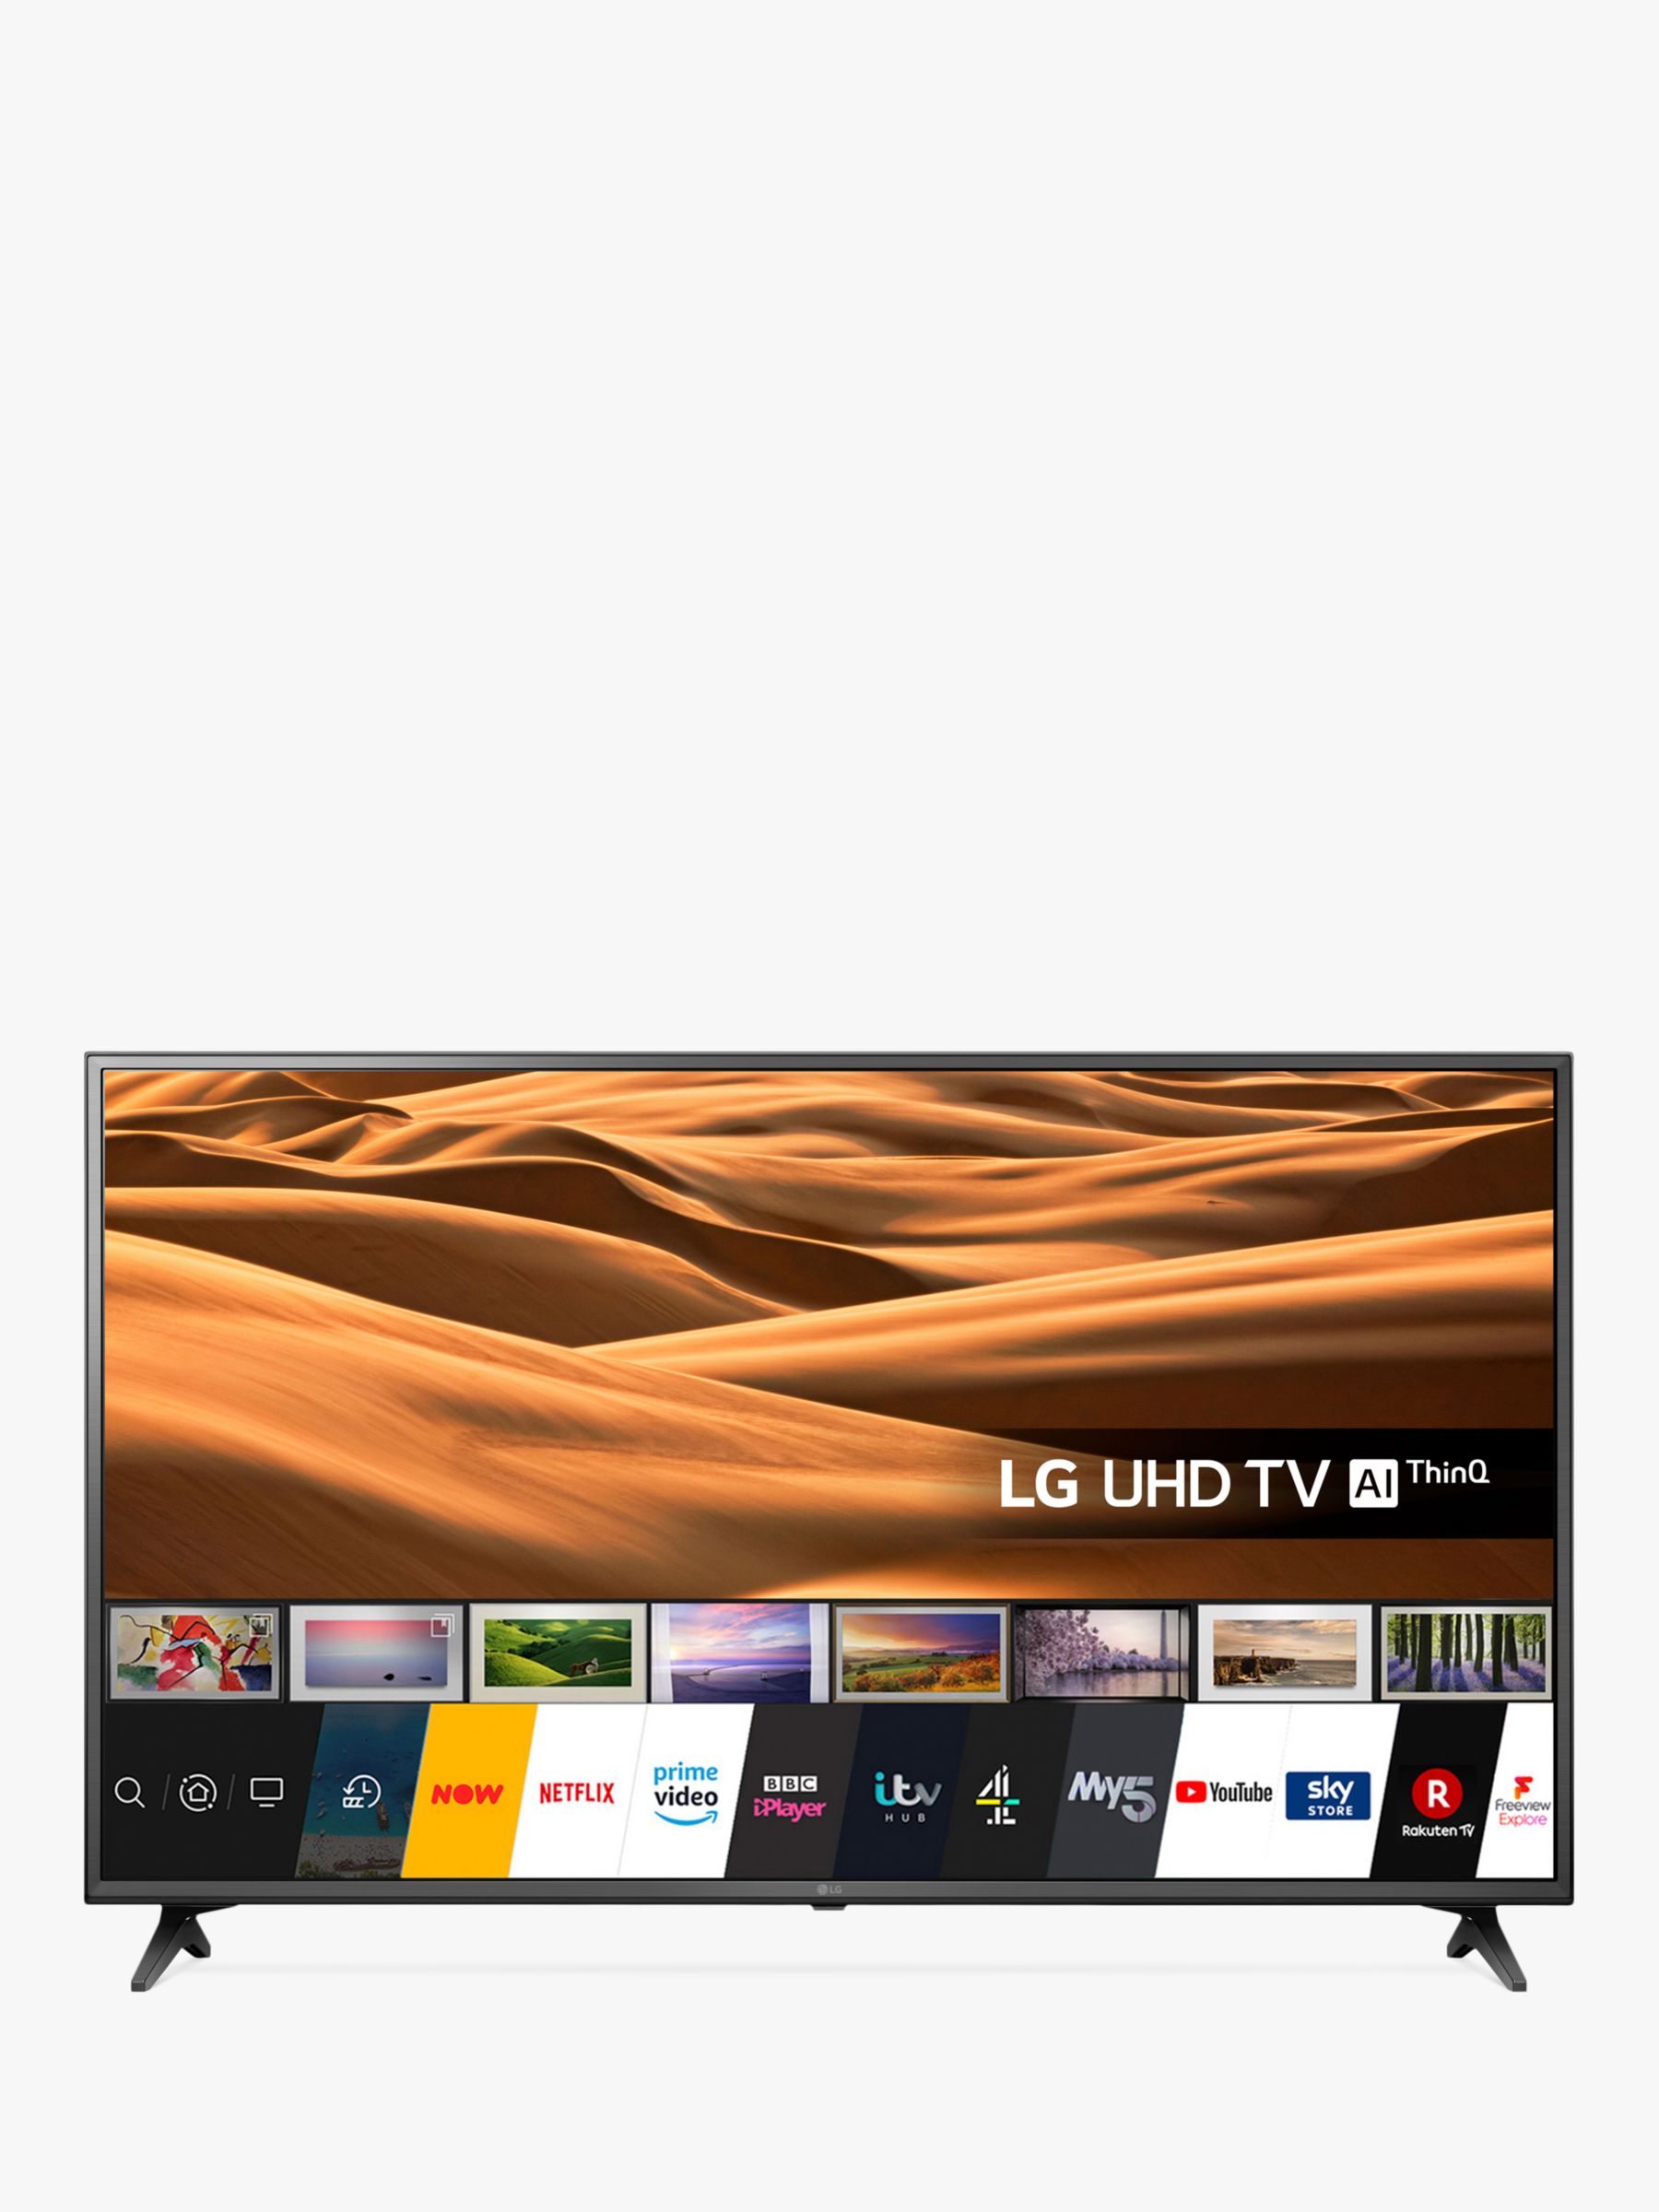 LG 55UM7050PLC (2020) LED HDR 4K Ultra HD Smart TV, 55 inch with Freeview Play/Freesat HD ...